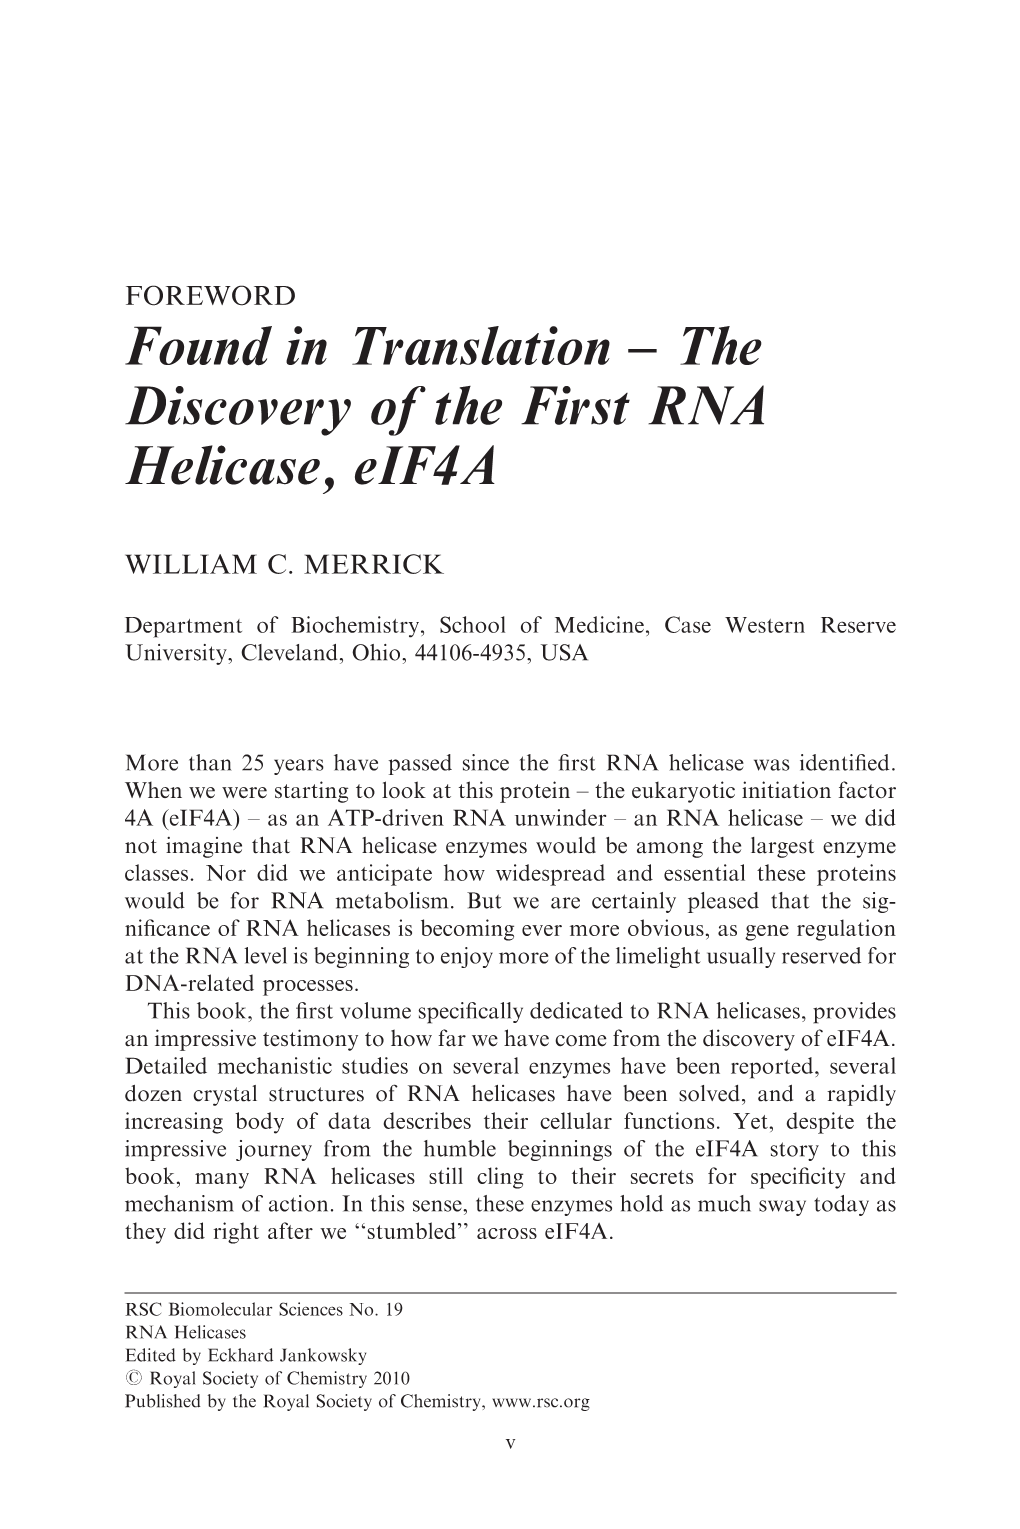 The Discovery of the First RNA Helicase, Eif4a